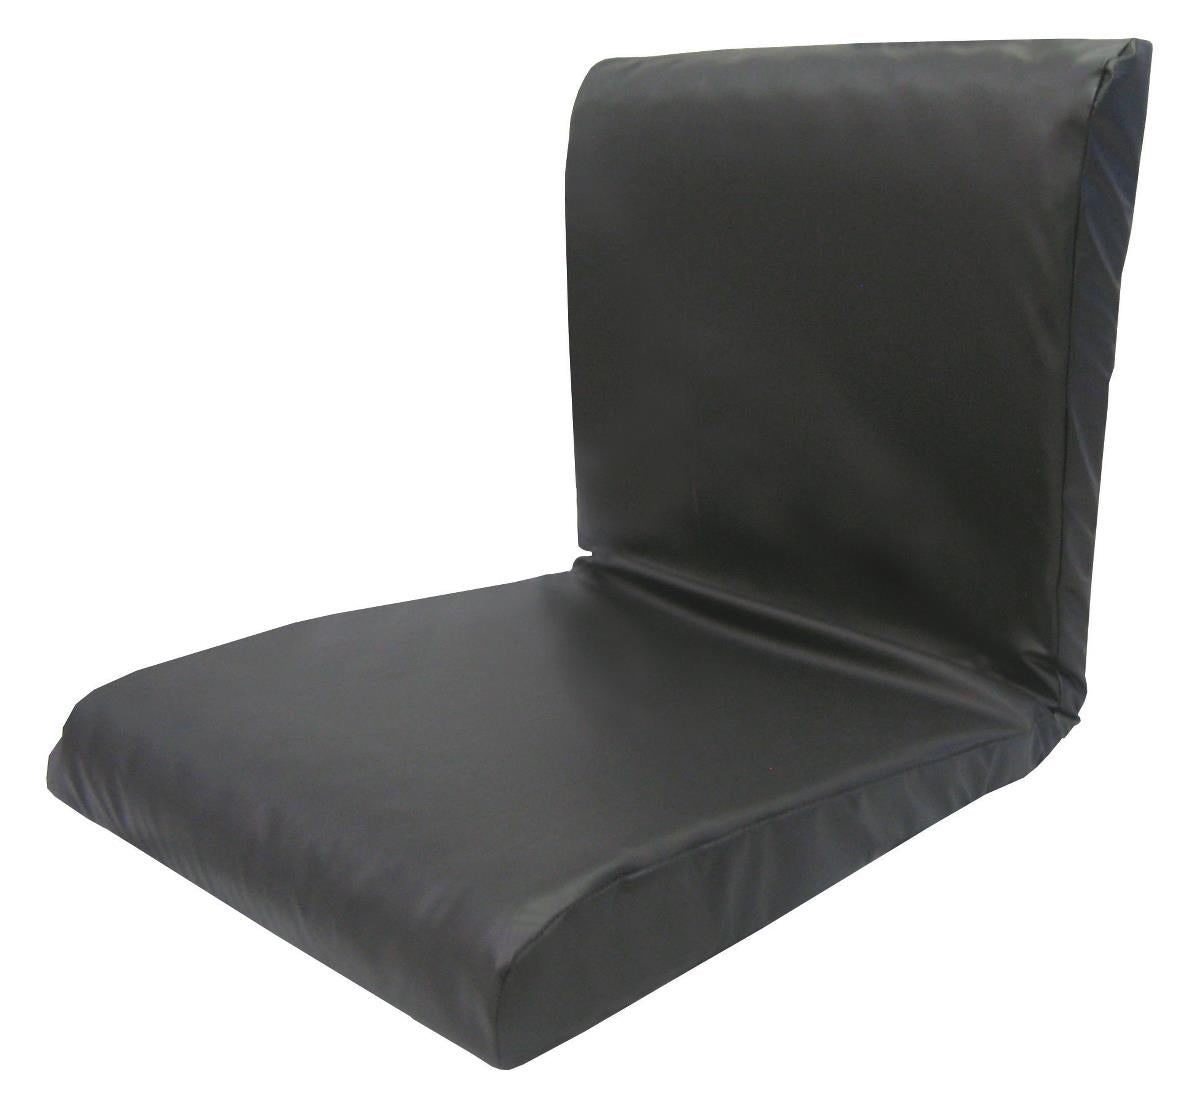 1 Each-Each / Foam / Wheelchair Cushions Patient Safety & Mobility - MEDLINE - Wasatch Medical Supply